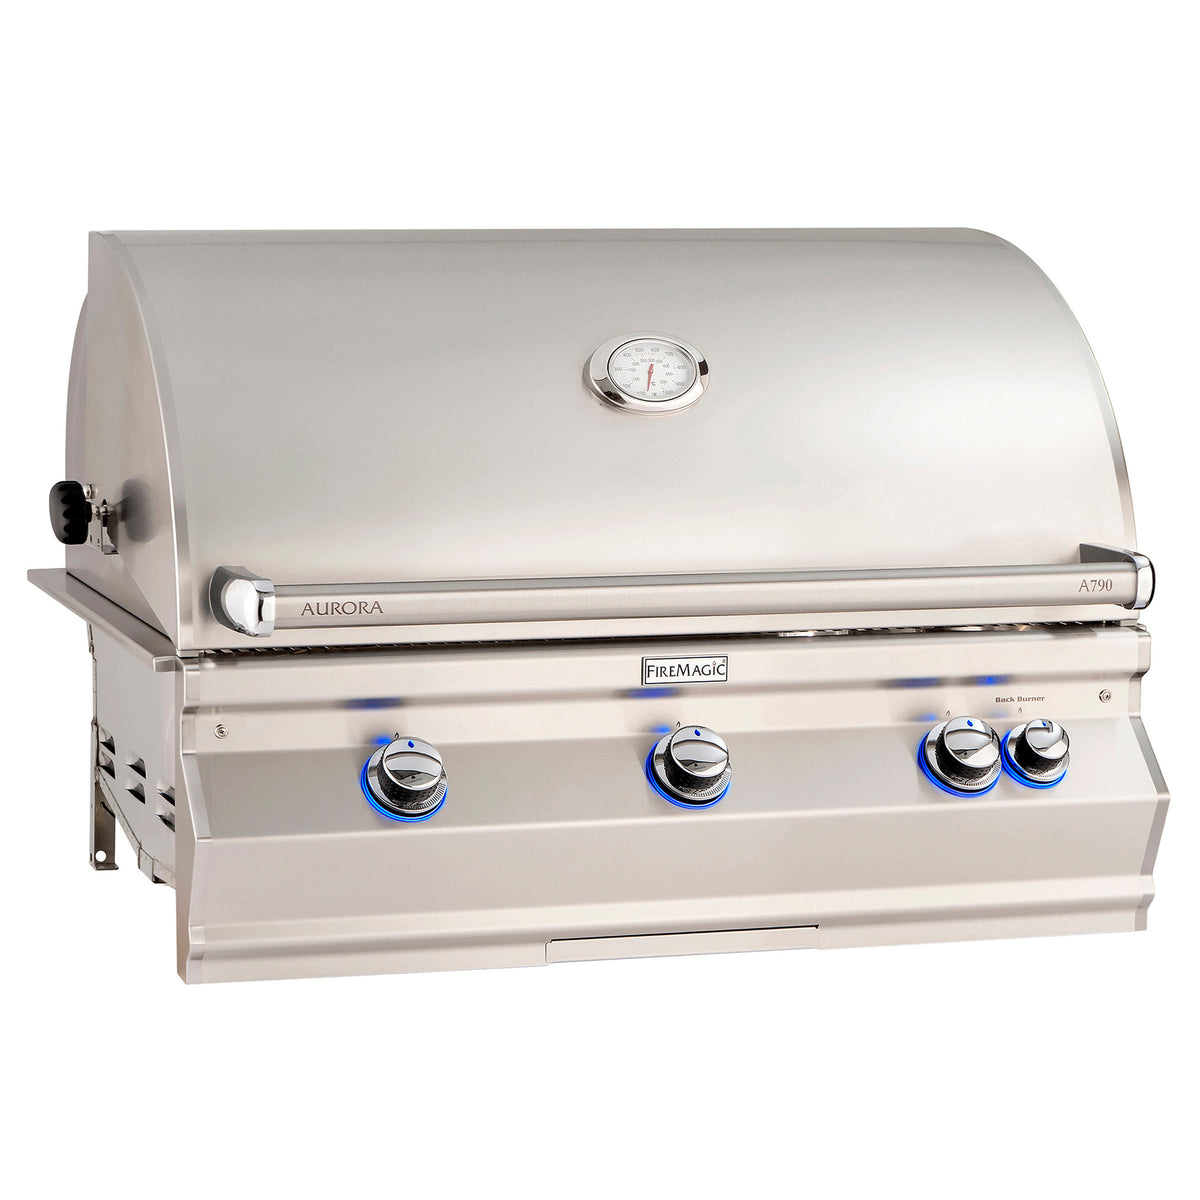 Fire Magic Aurora A790i Built-In Grills with Analog Thermometer Liquid Propane